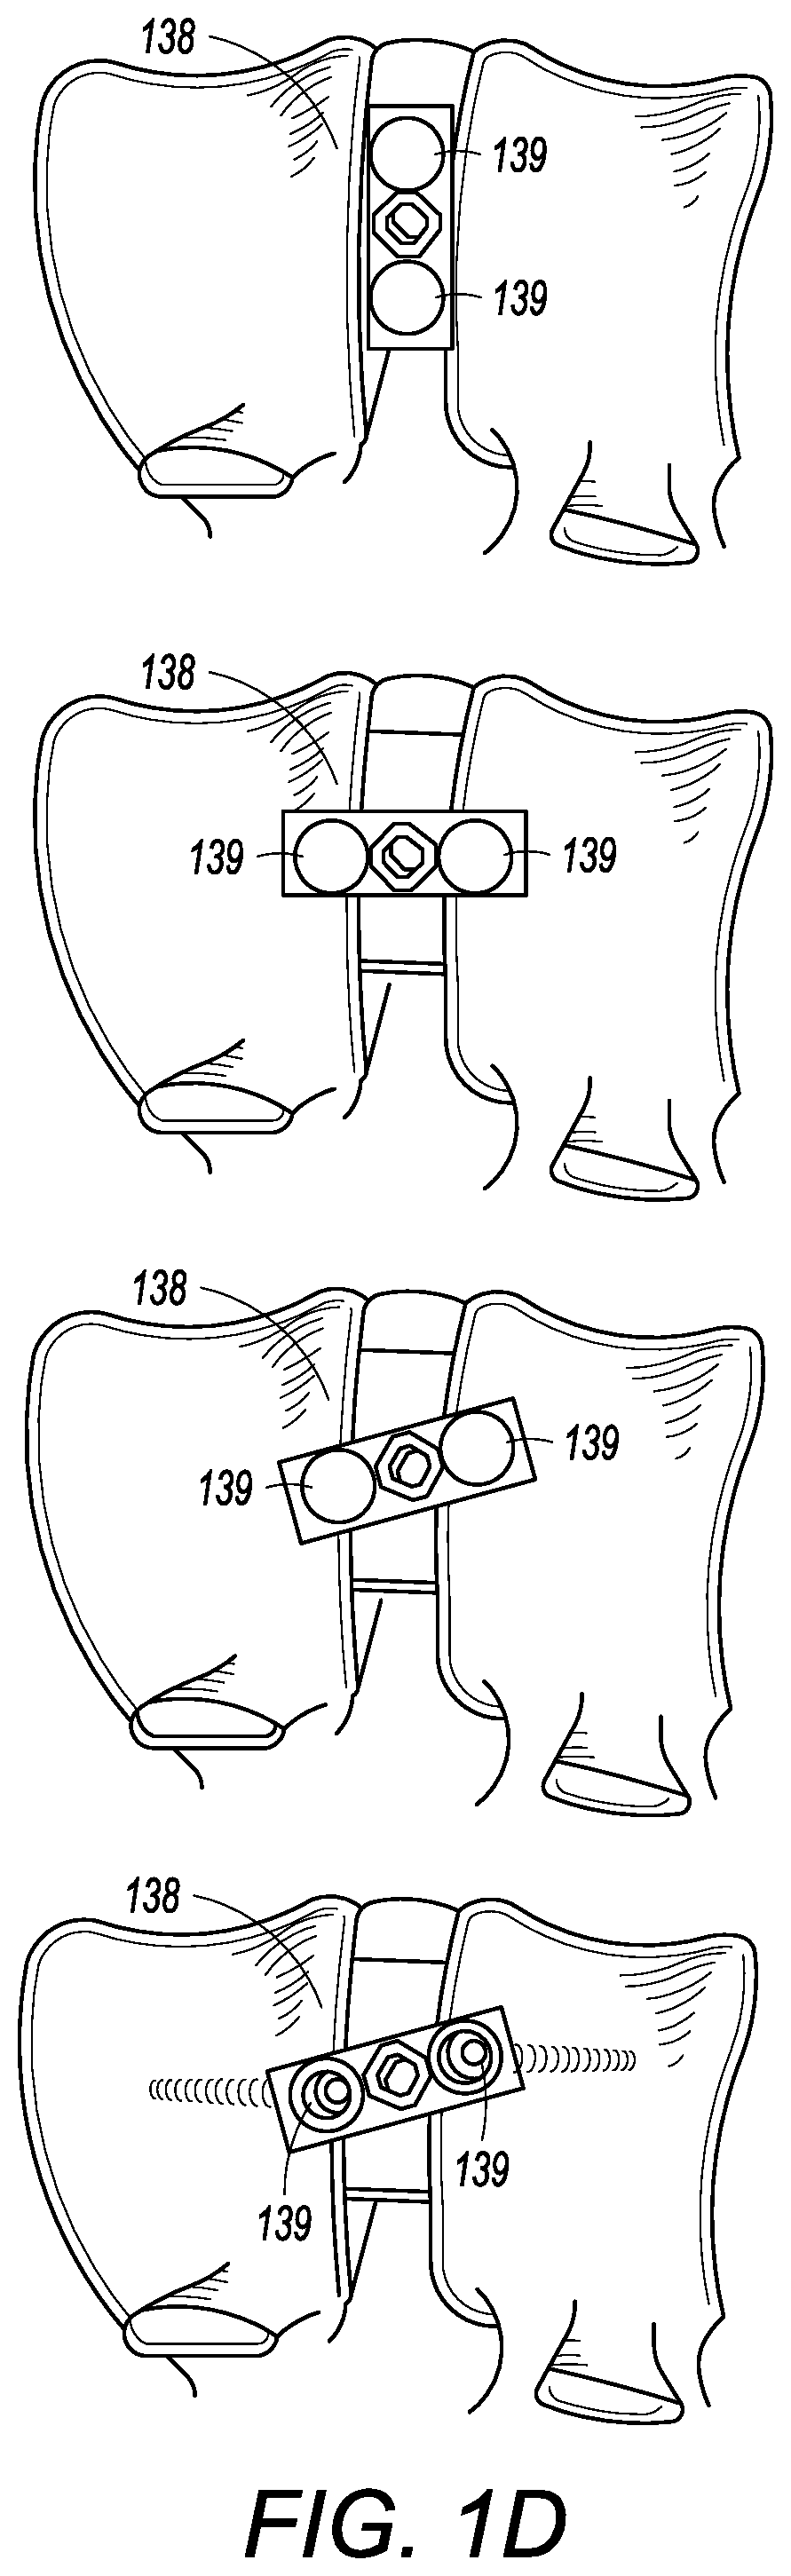 Interbody cage with spill-free biological material compartment